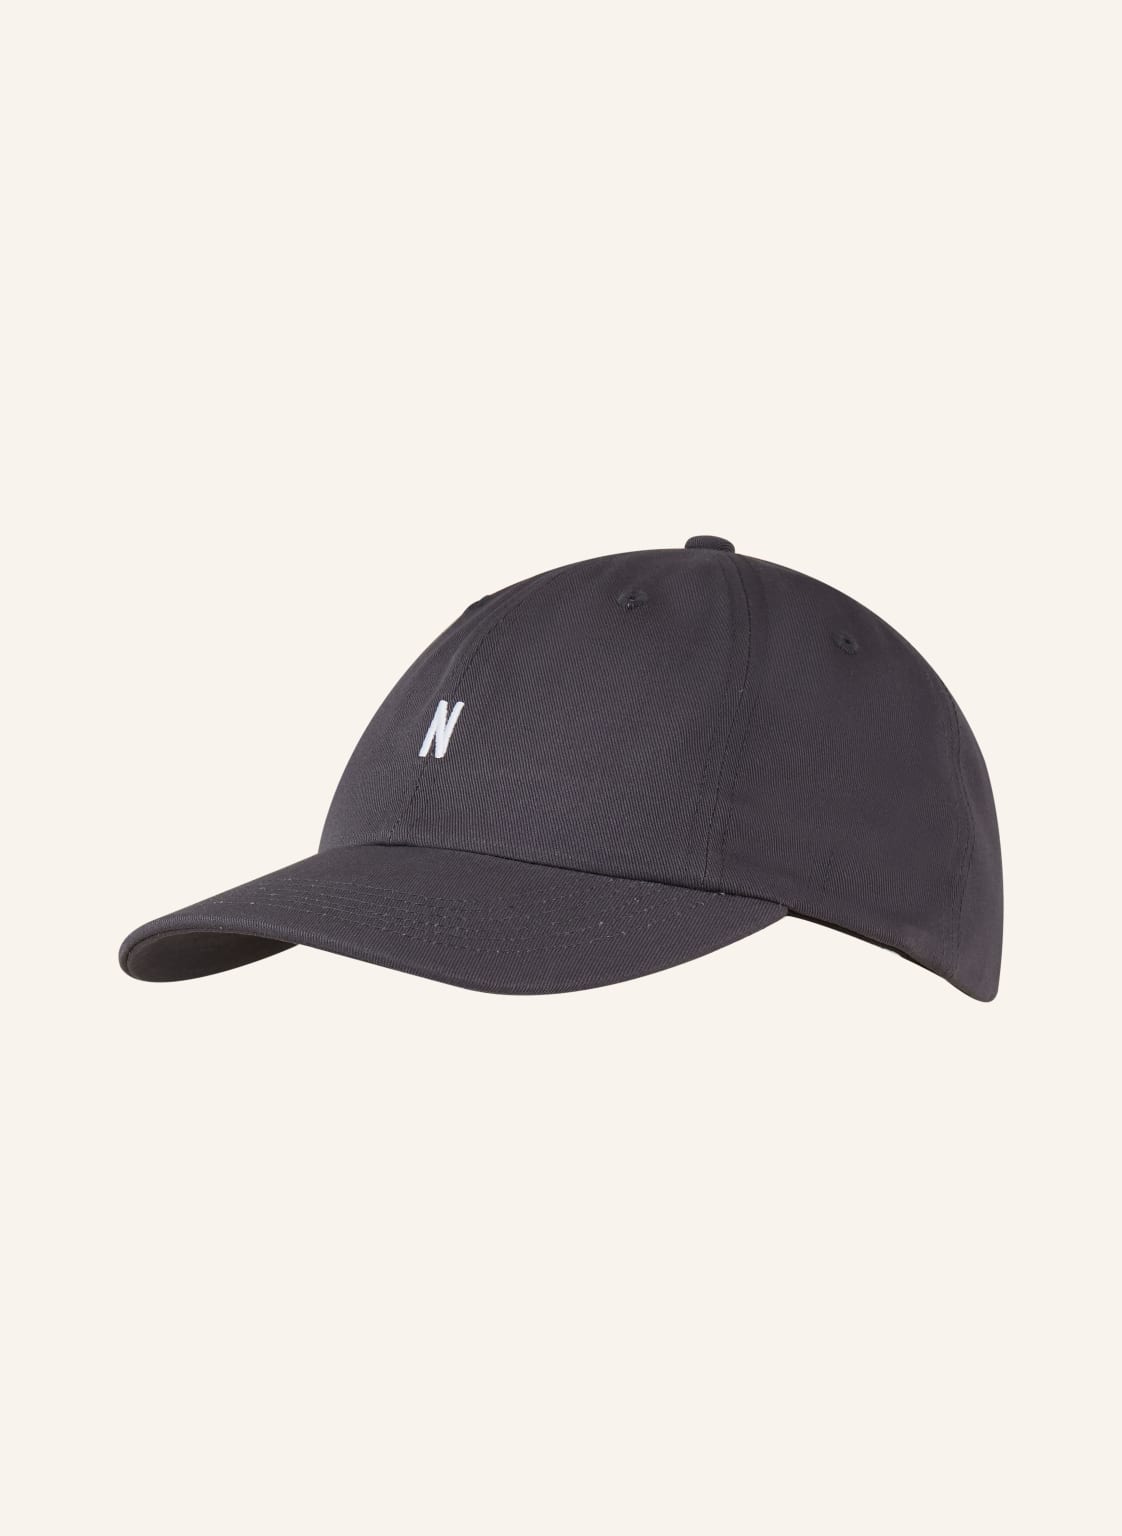 Norse Projects Cap grau von Norse Projects